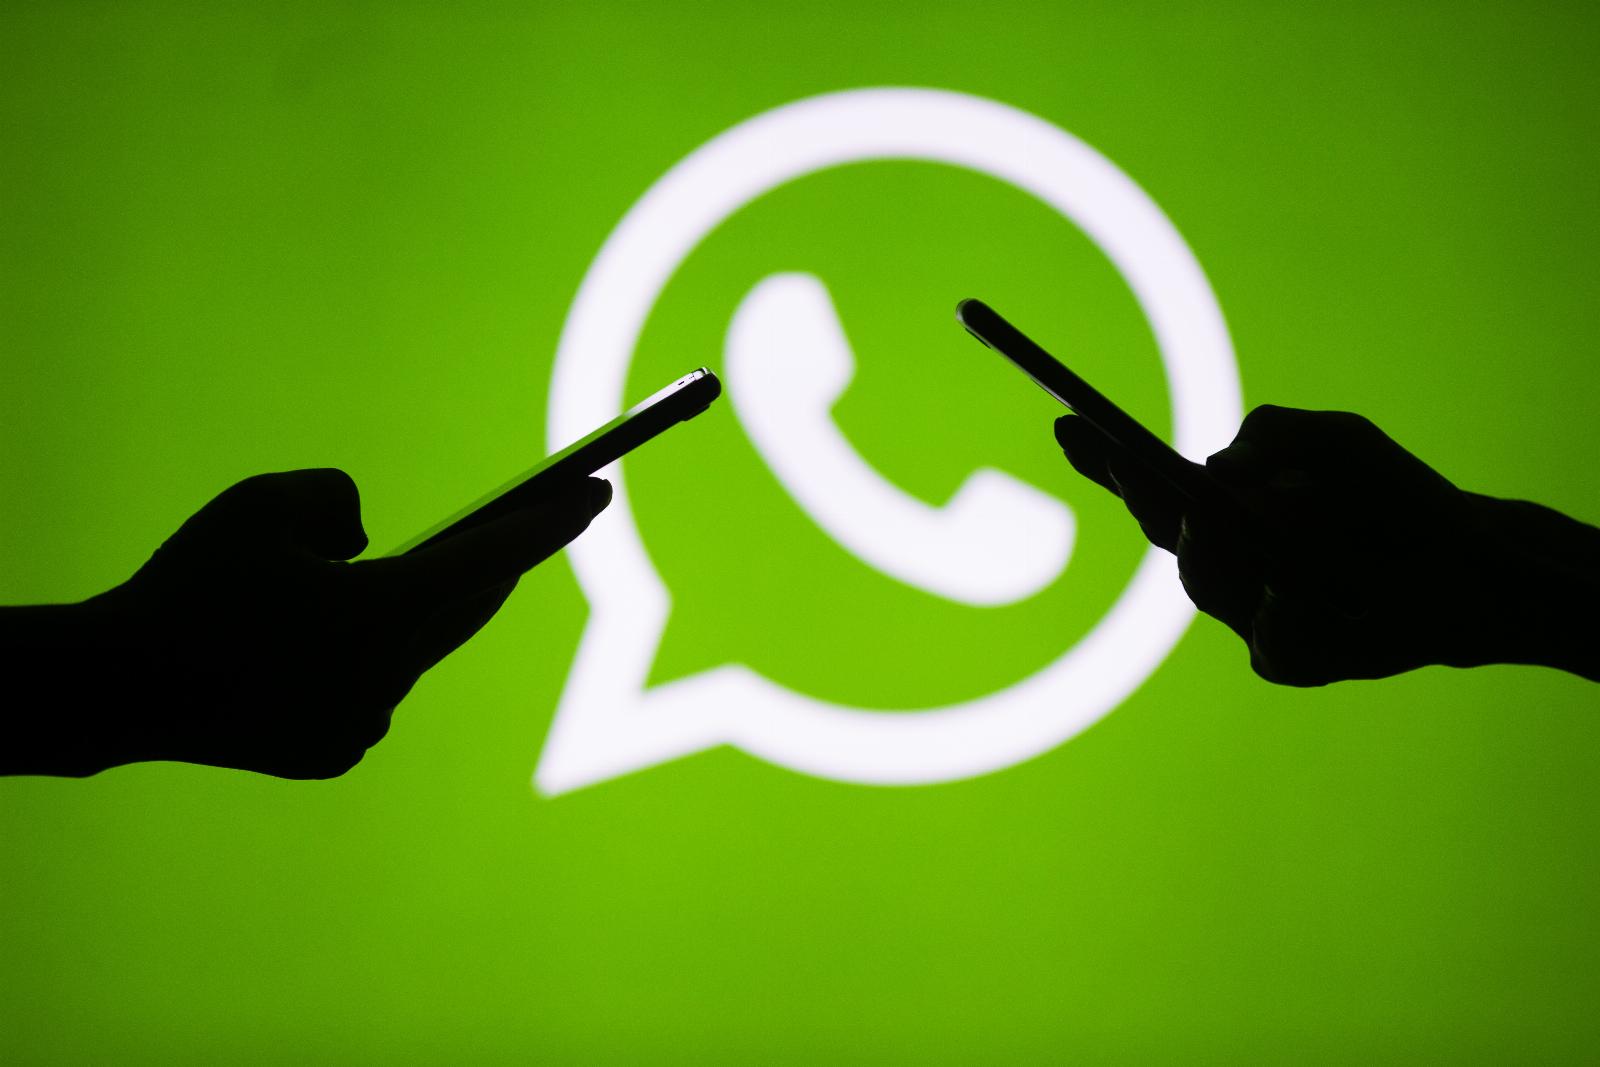 WhatsApp is preparing to roll out third-party chat support